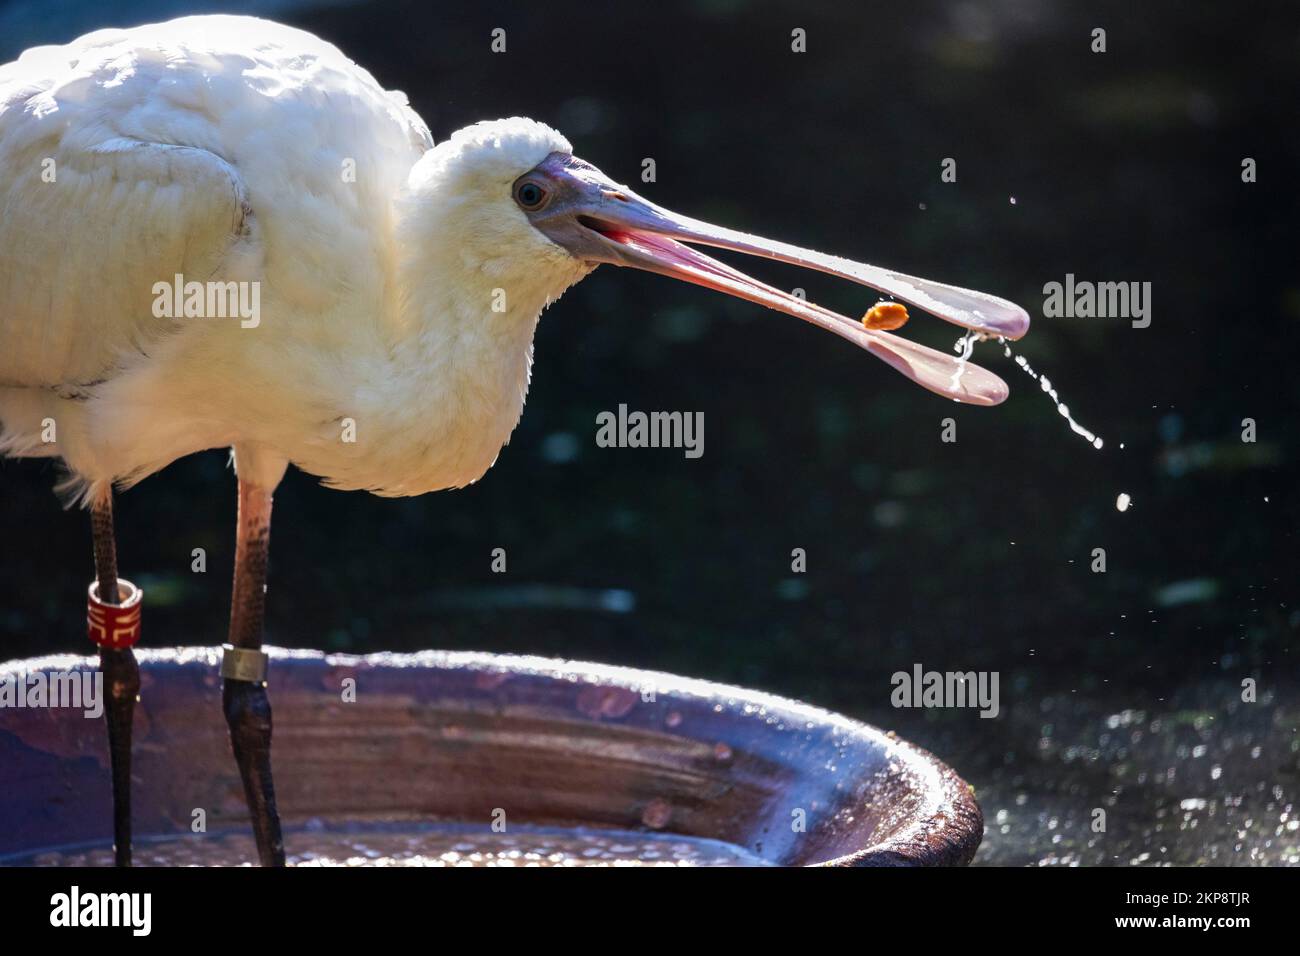 A white African spoonbill eating fish from the water Stock Photo